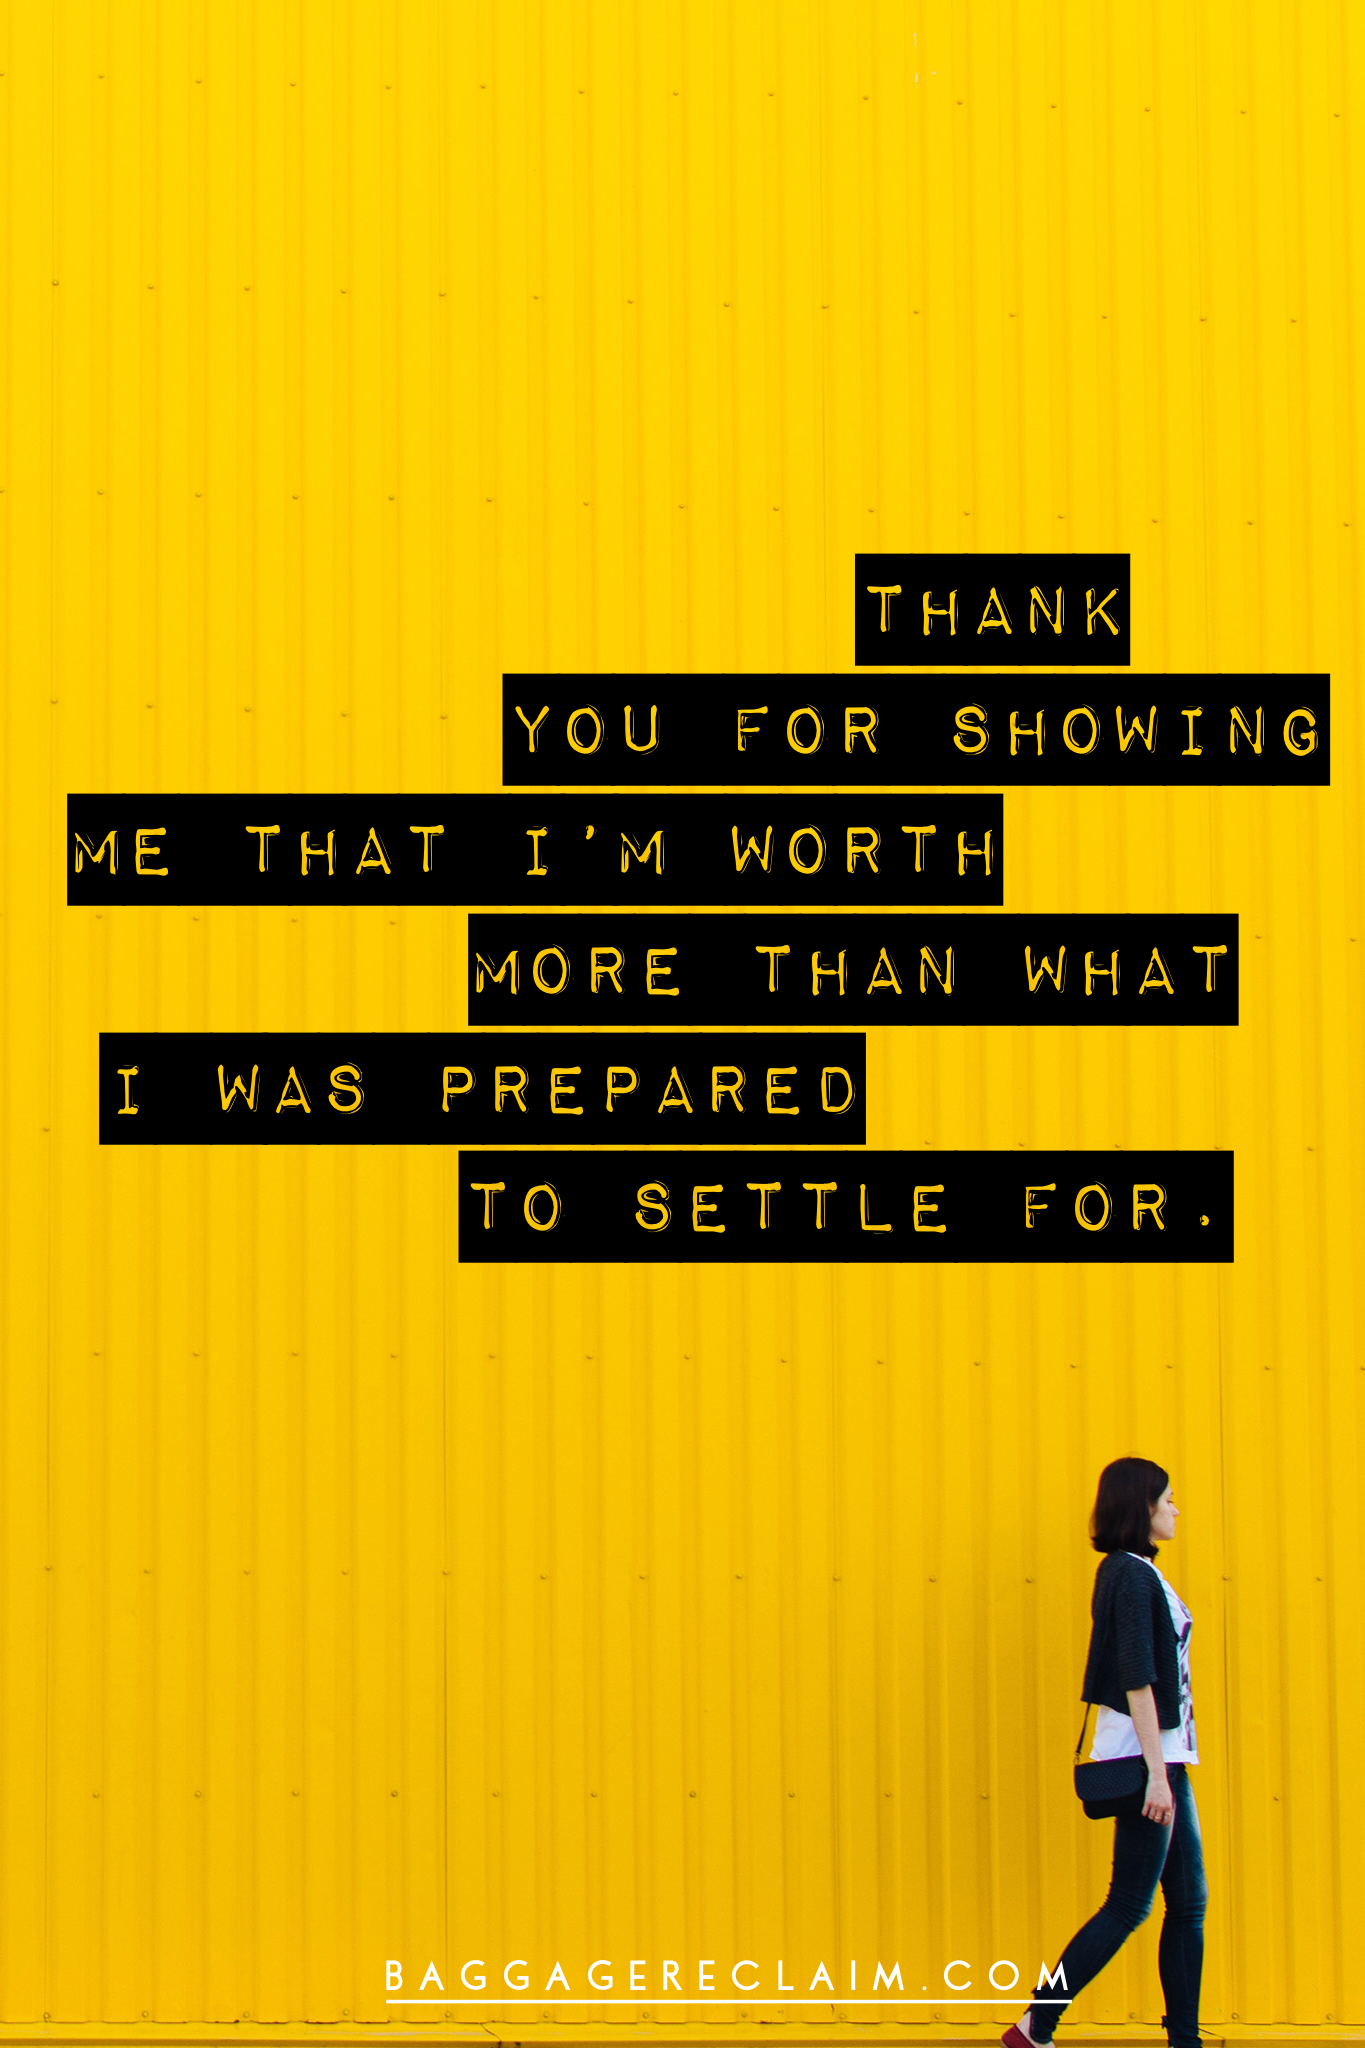 Thank you for showing me that I'm worth more than what I was prepared to settle for.